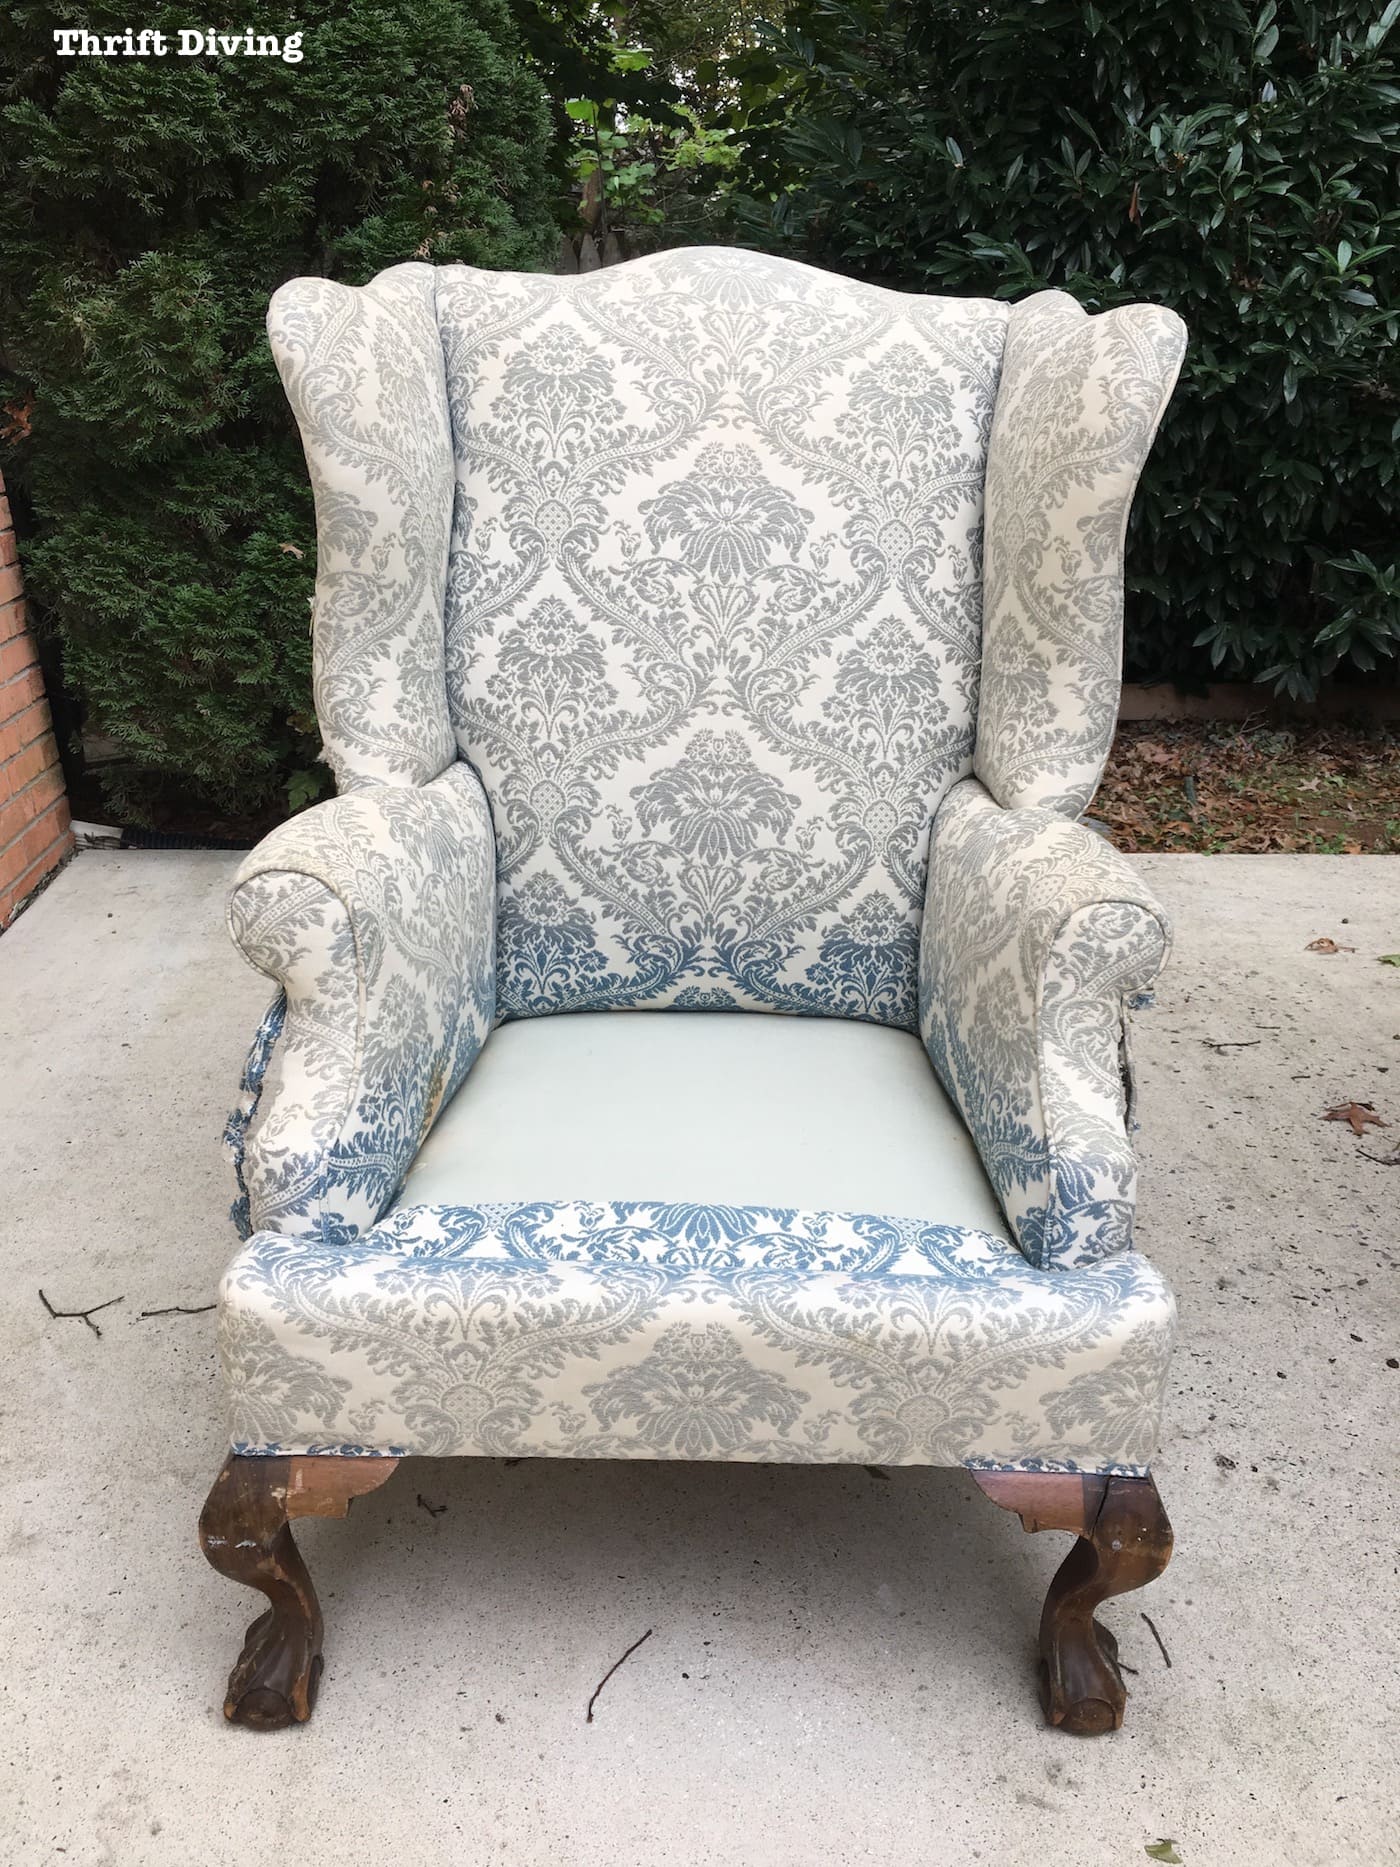 How To Reupholster A Wingback Chair, How Much Does It Cost To Reupholster A Wingback Chair Uk